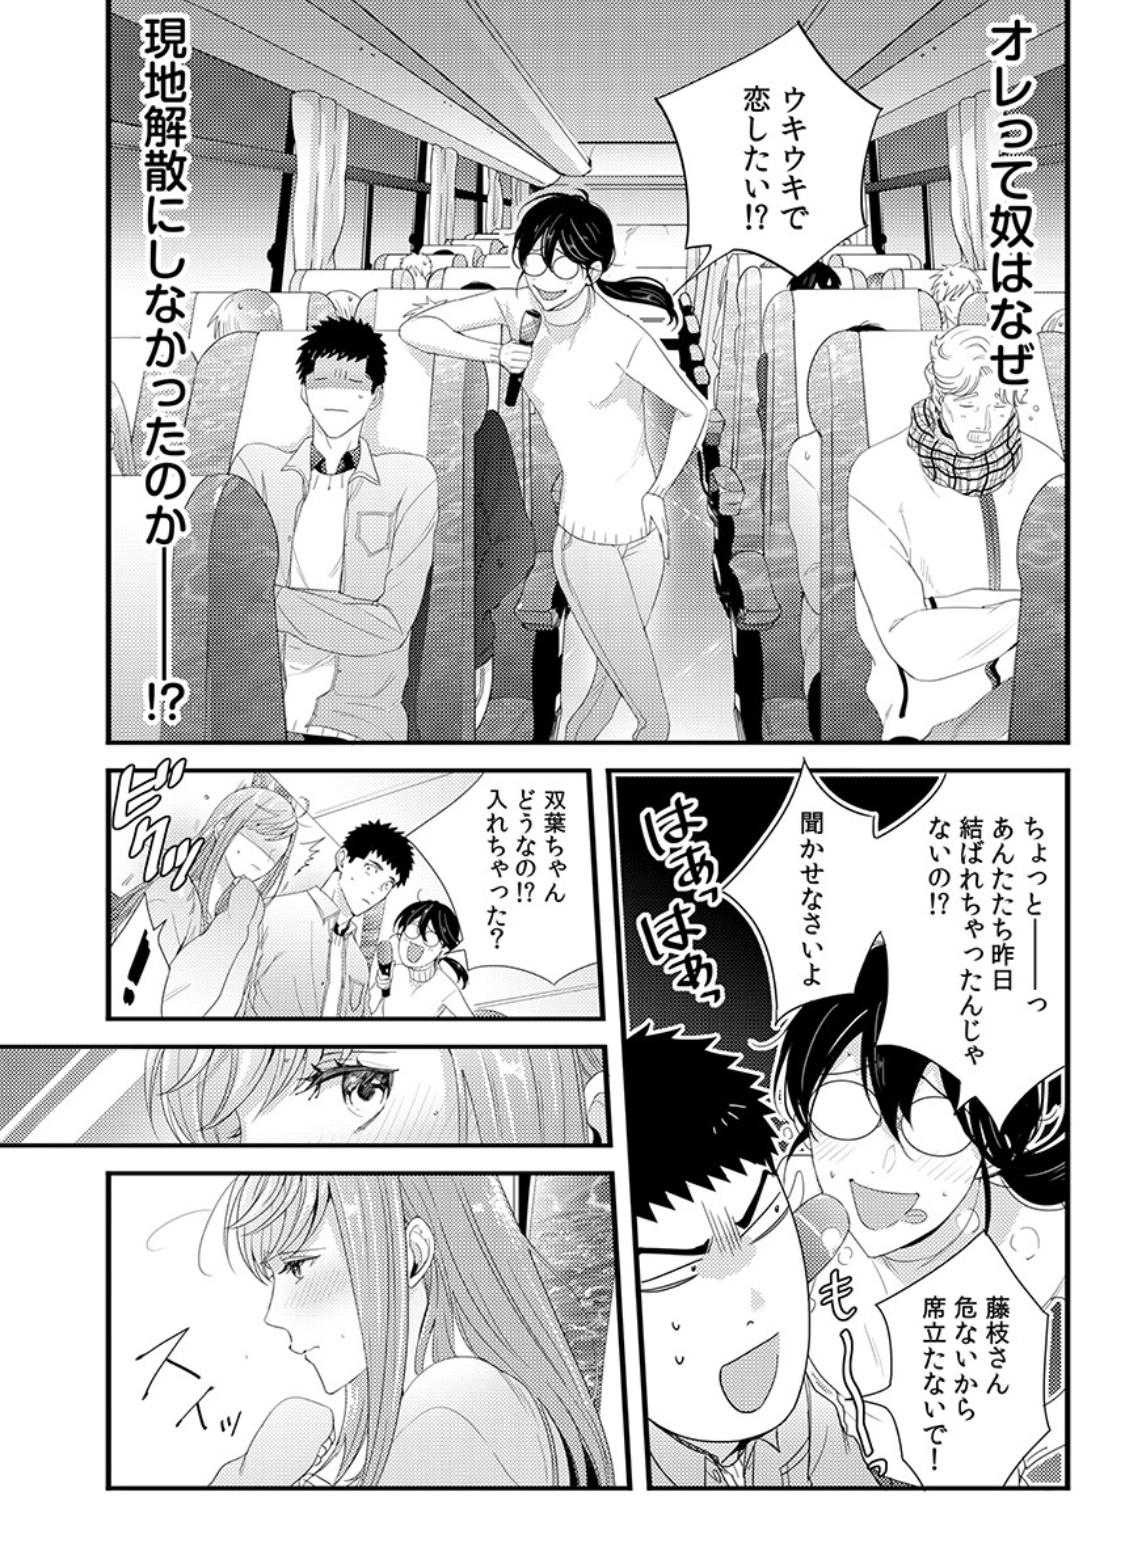 Please Let Me Hold You Futaba-San! Ch. 1+2 30